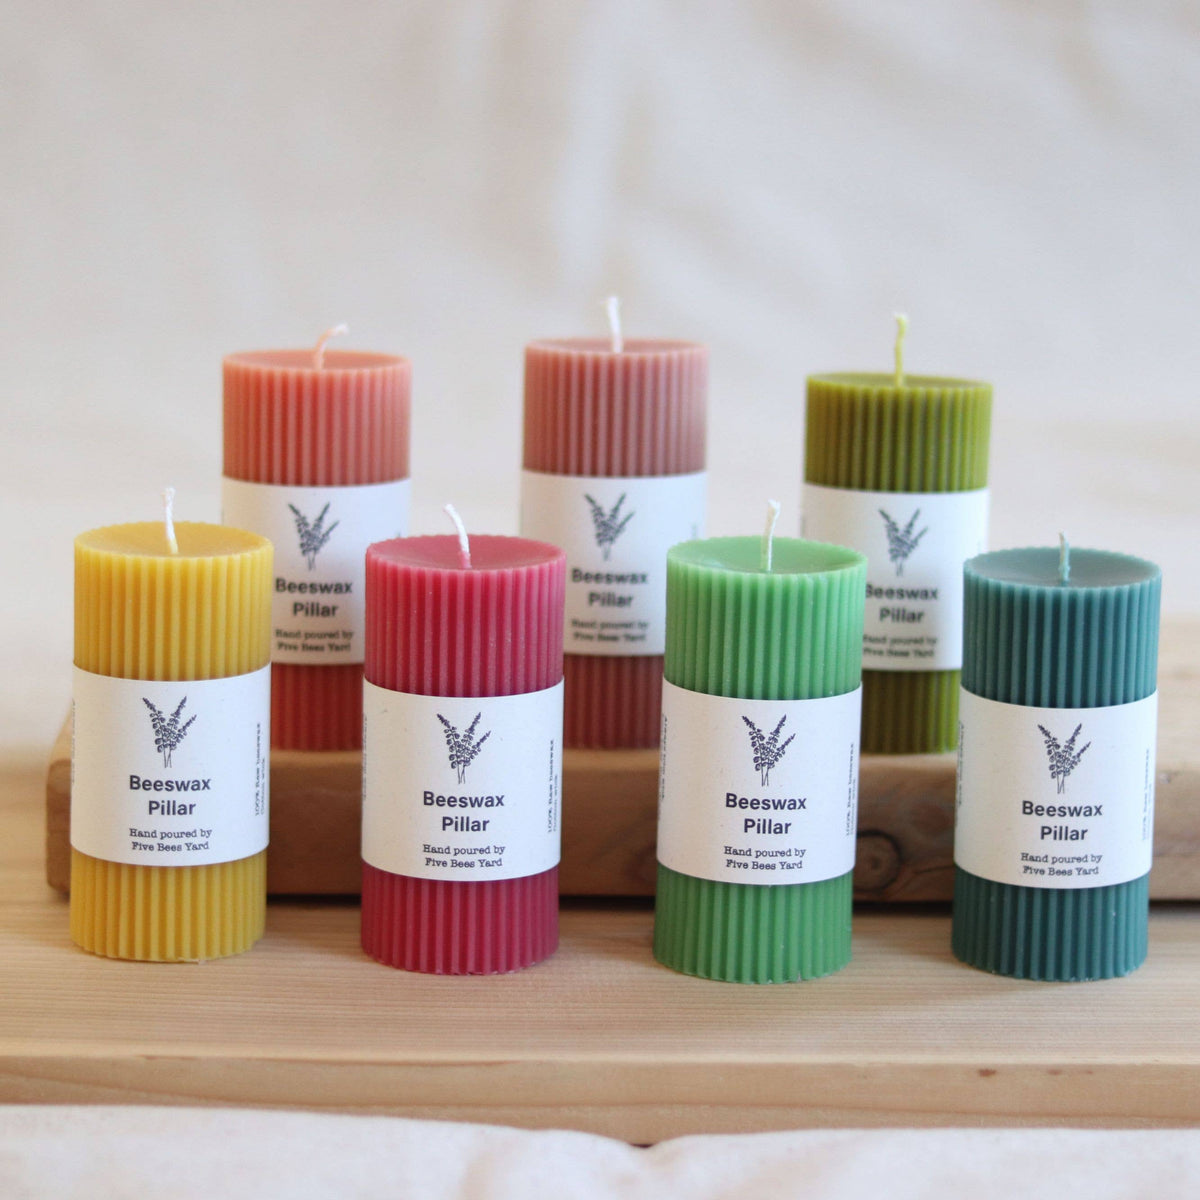 Five Bees Yard - Linear Pillar Candles | Natural Dyes and Clean Burn | Gift